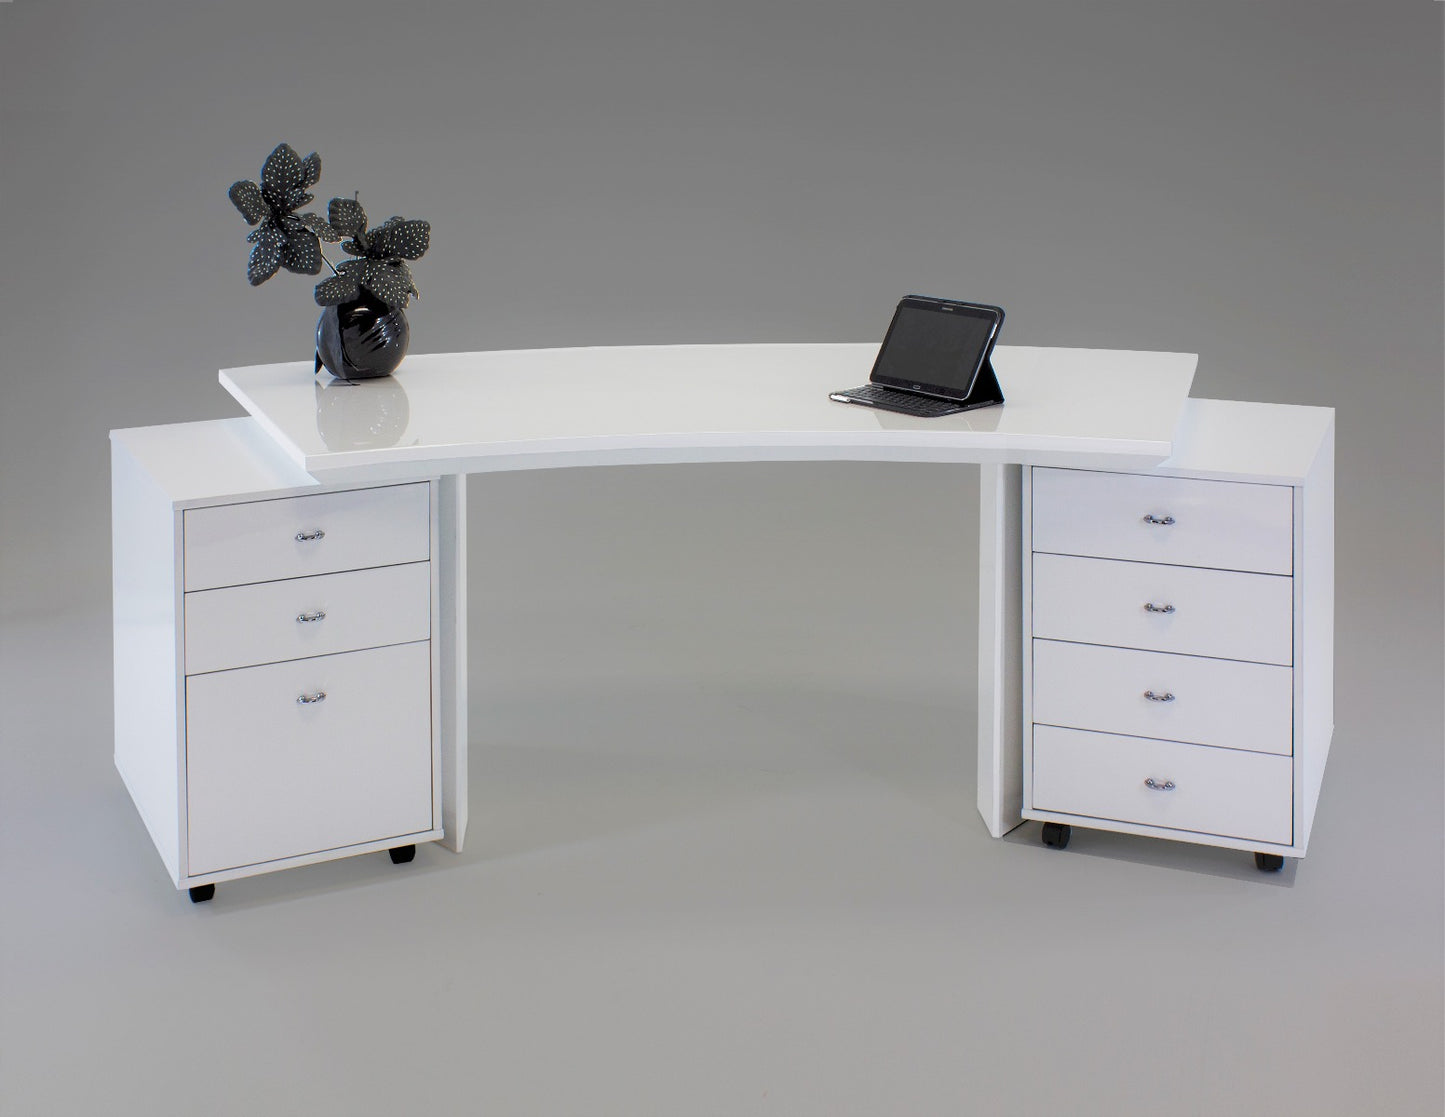 Sharelle Furnishings Bali Curved Desk - Wenge or White Lacquer